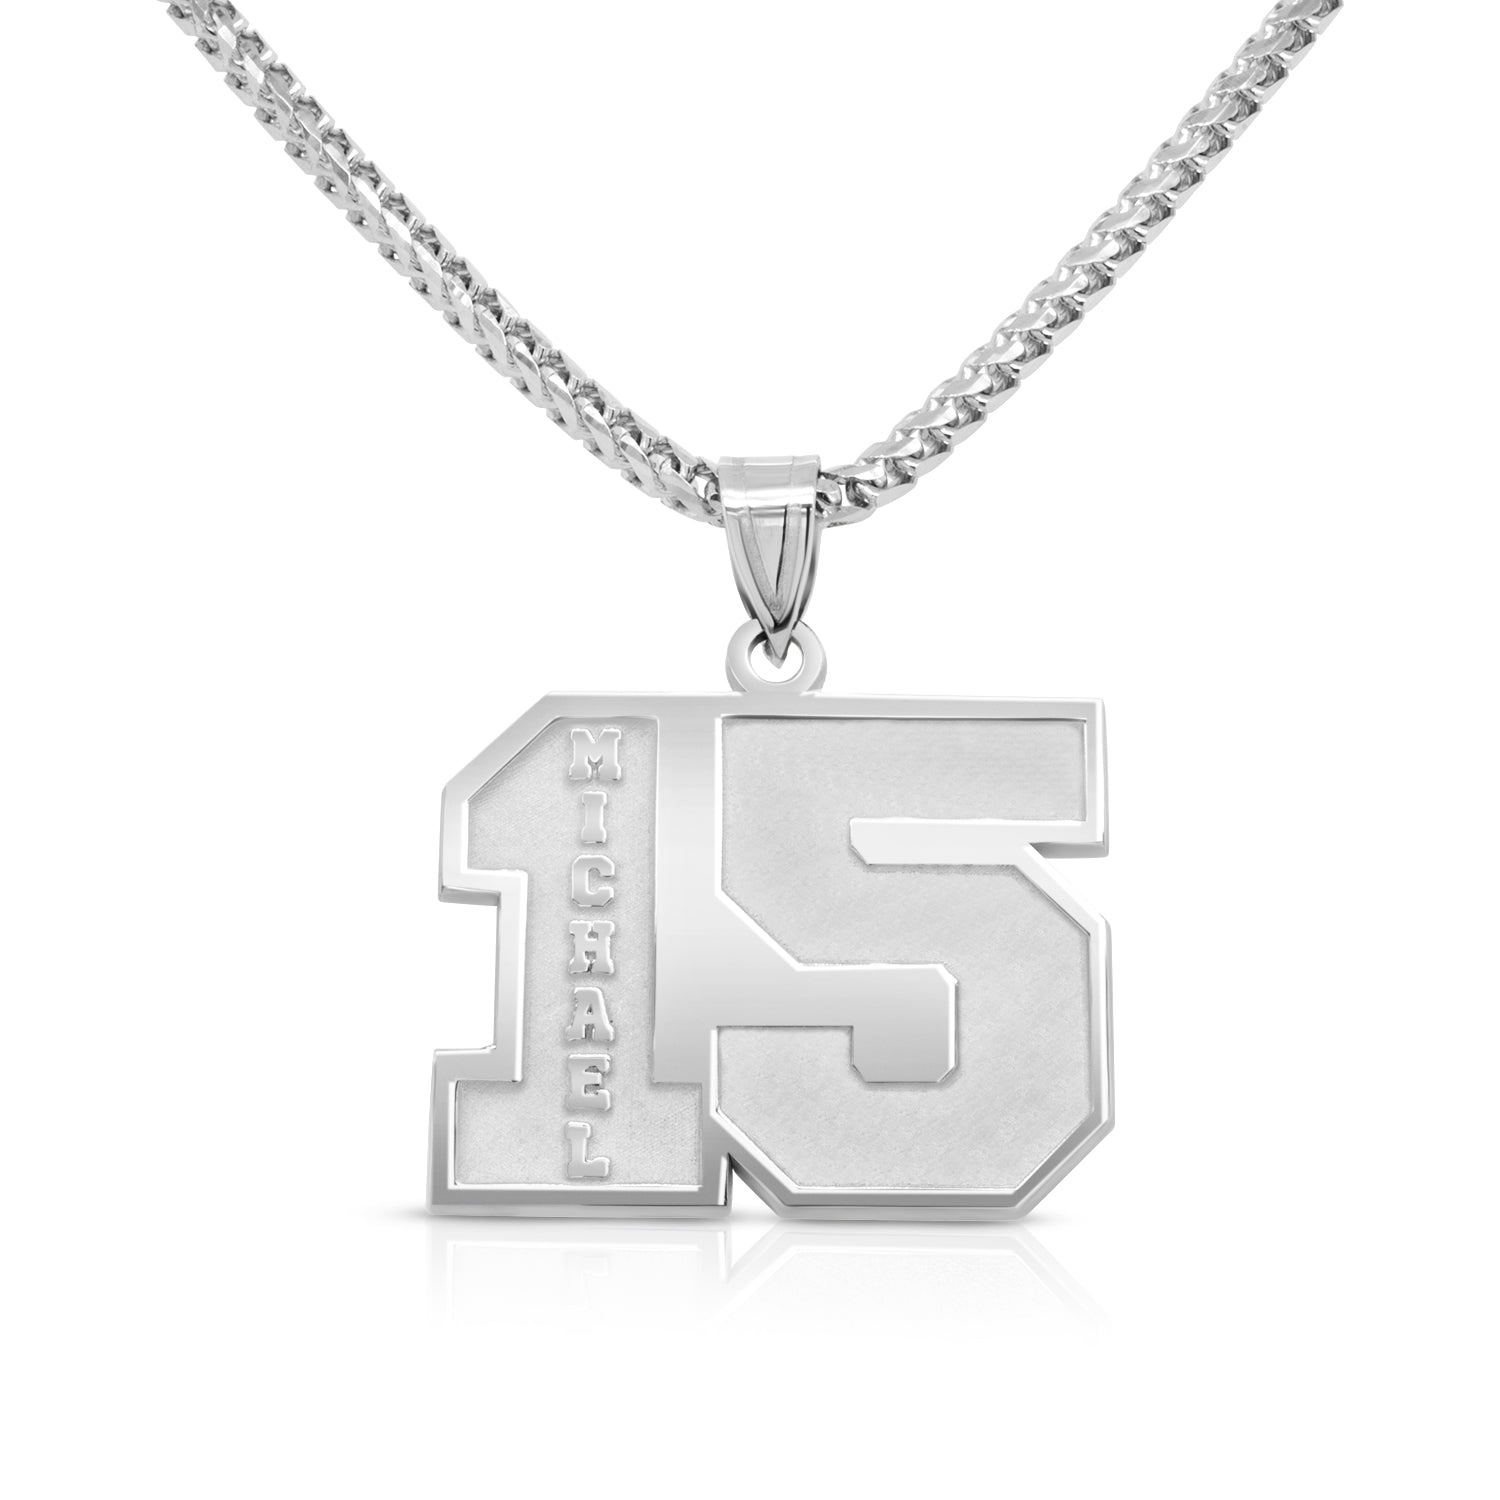 Silver numerical 15 pendant on a white background